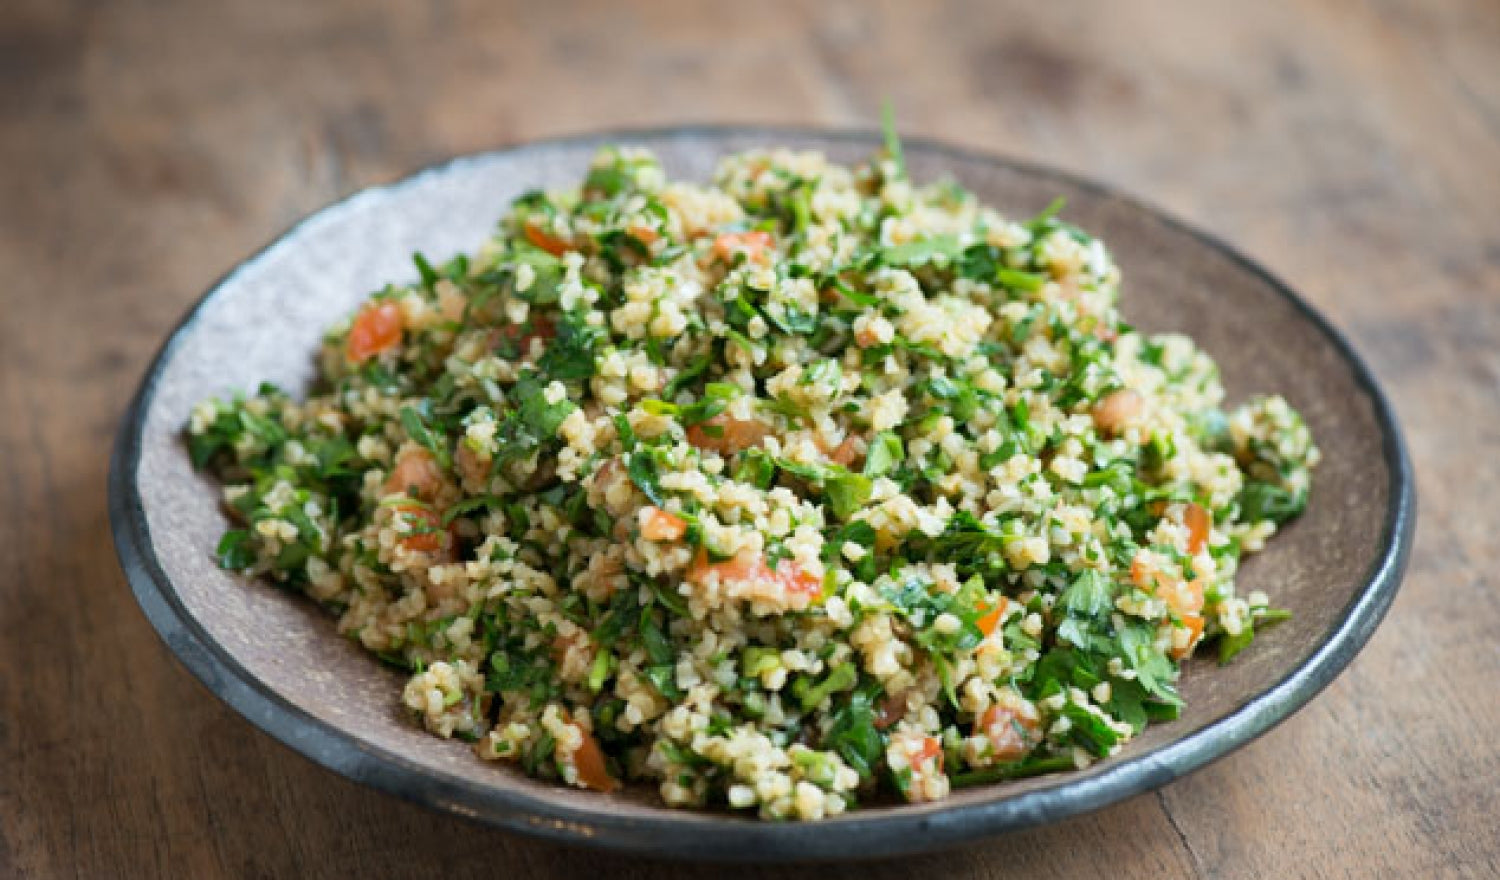 How To Make Tabbouleh Salad With Pomegranate Molasses Dressing